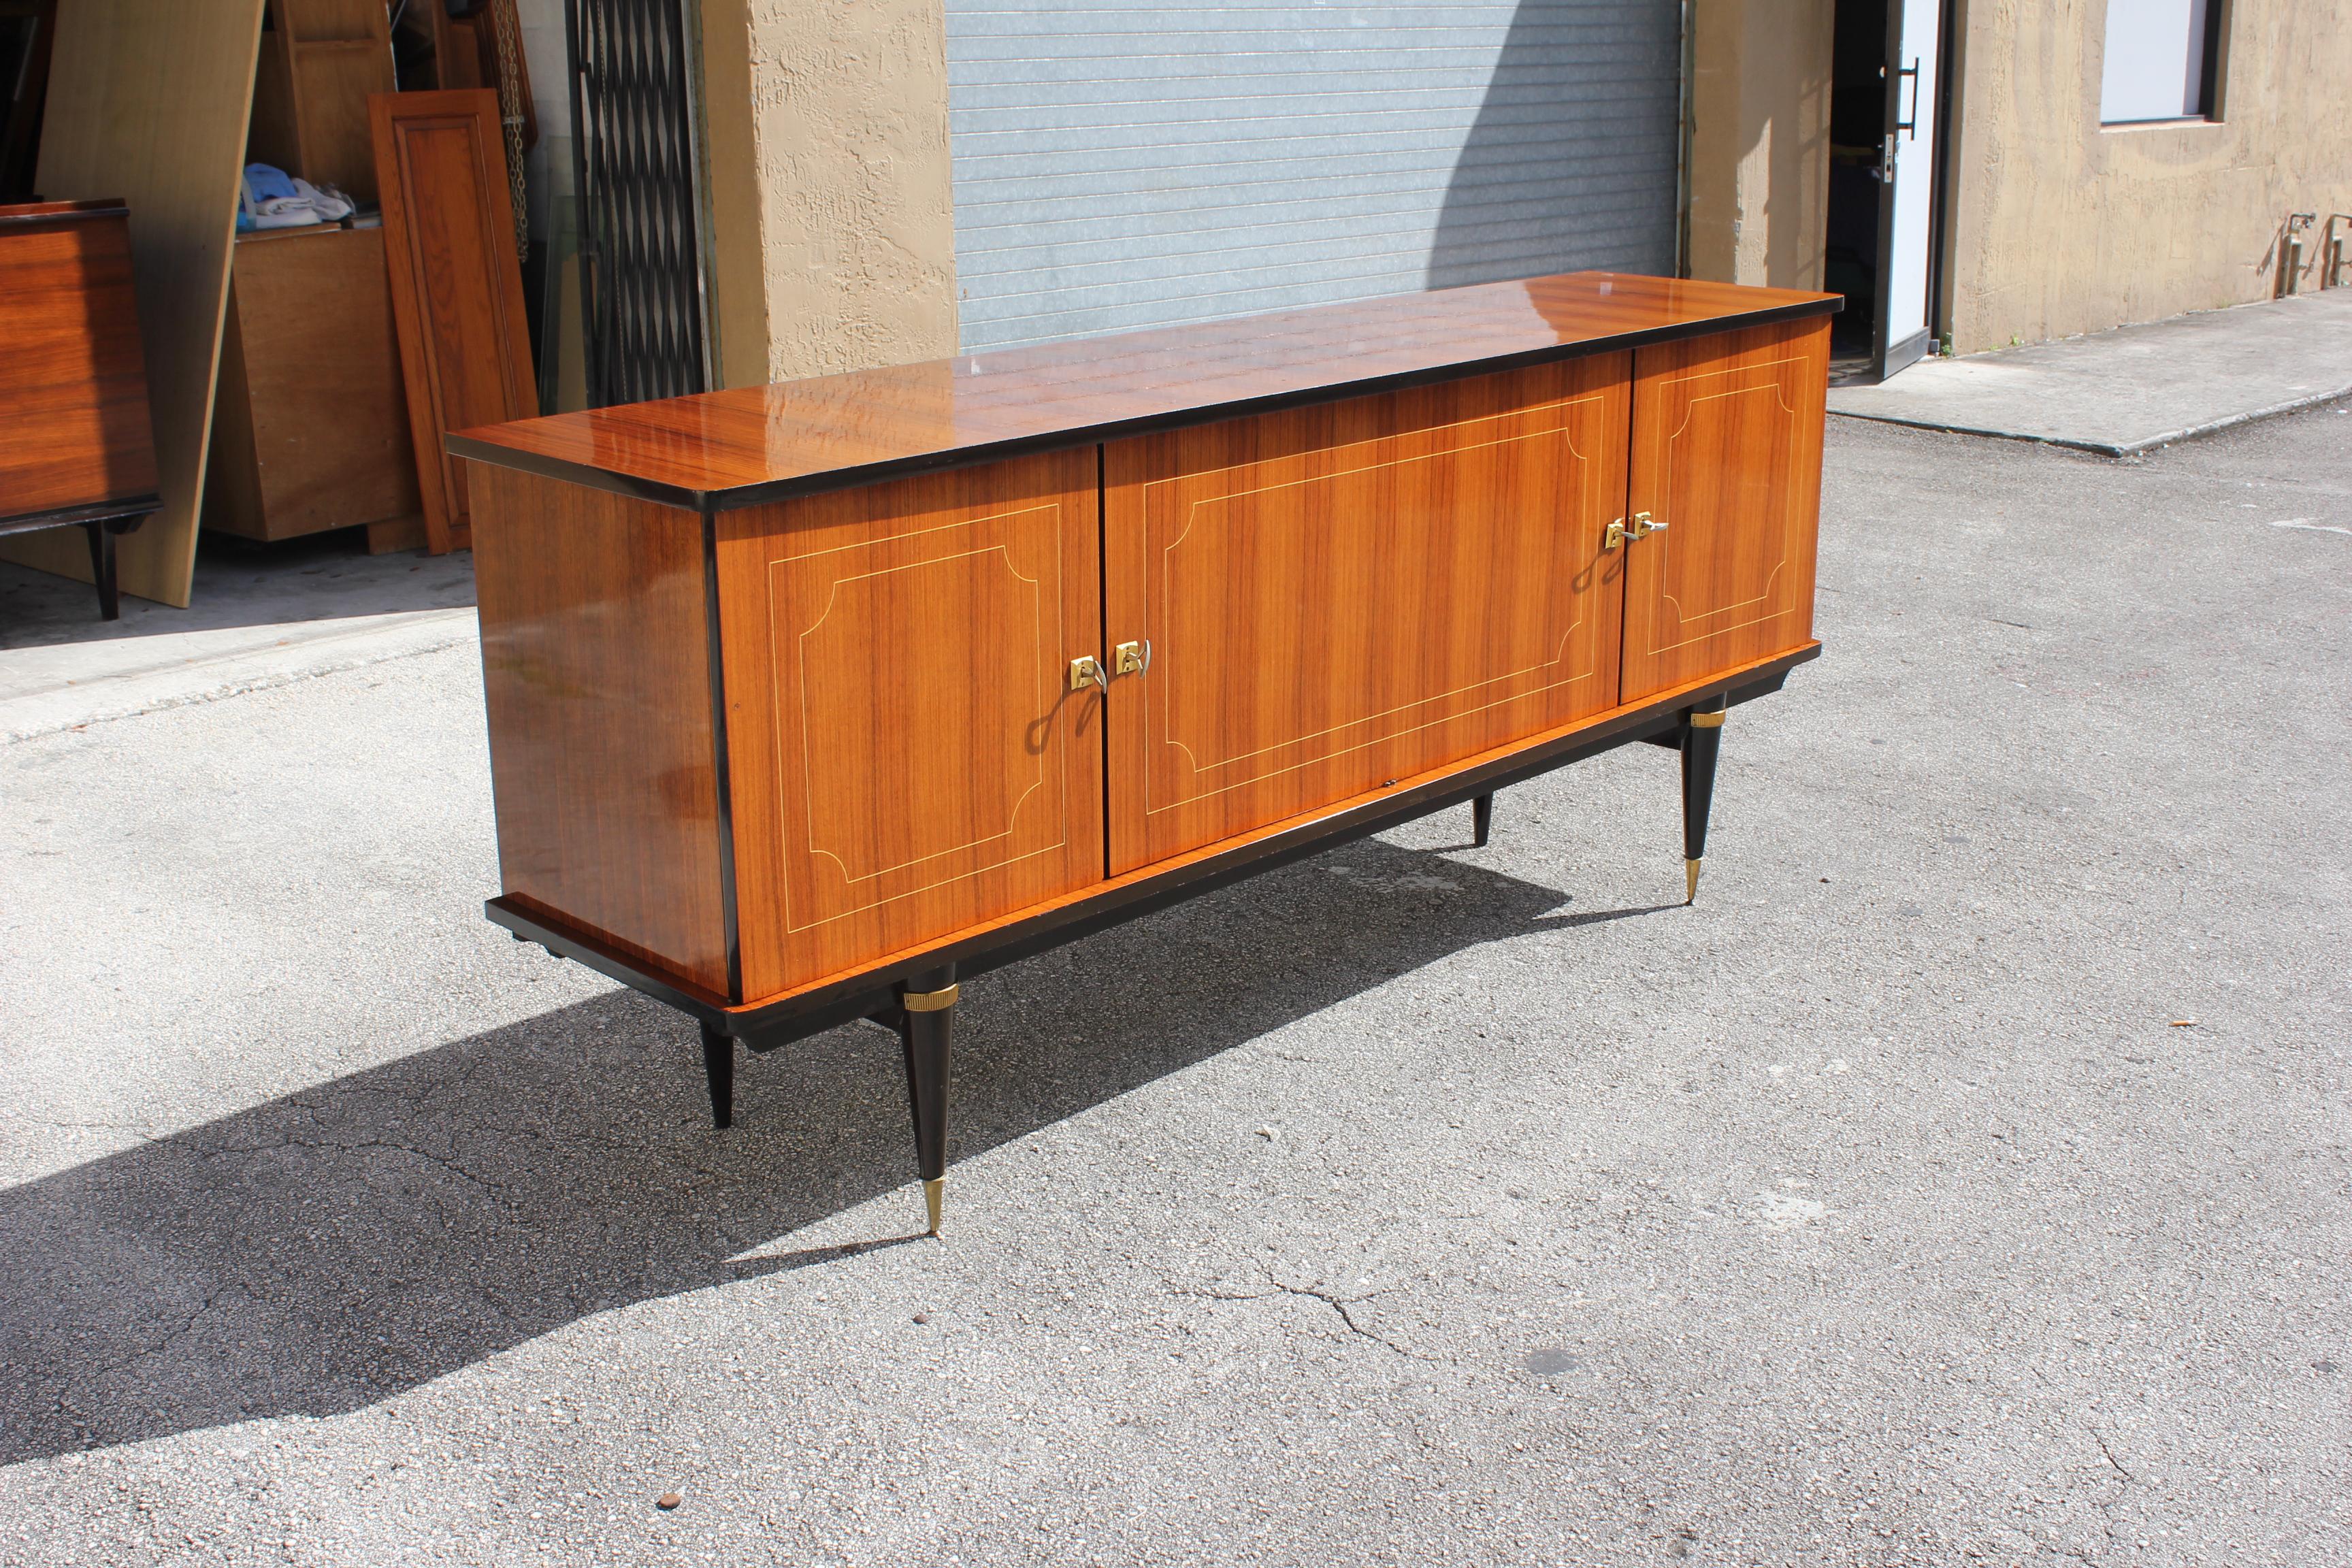 Beautiful French art deco light exotic Macassar ebony sideboard/buffet, circa 1940s. Very nice door design, the sideboard is in very good condition. With 2 drawers inside and 6 adjustable shelves, you can remove all the shelves if you need more